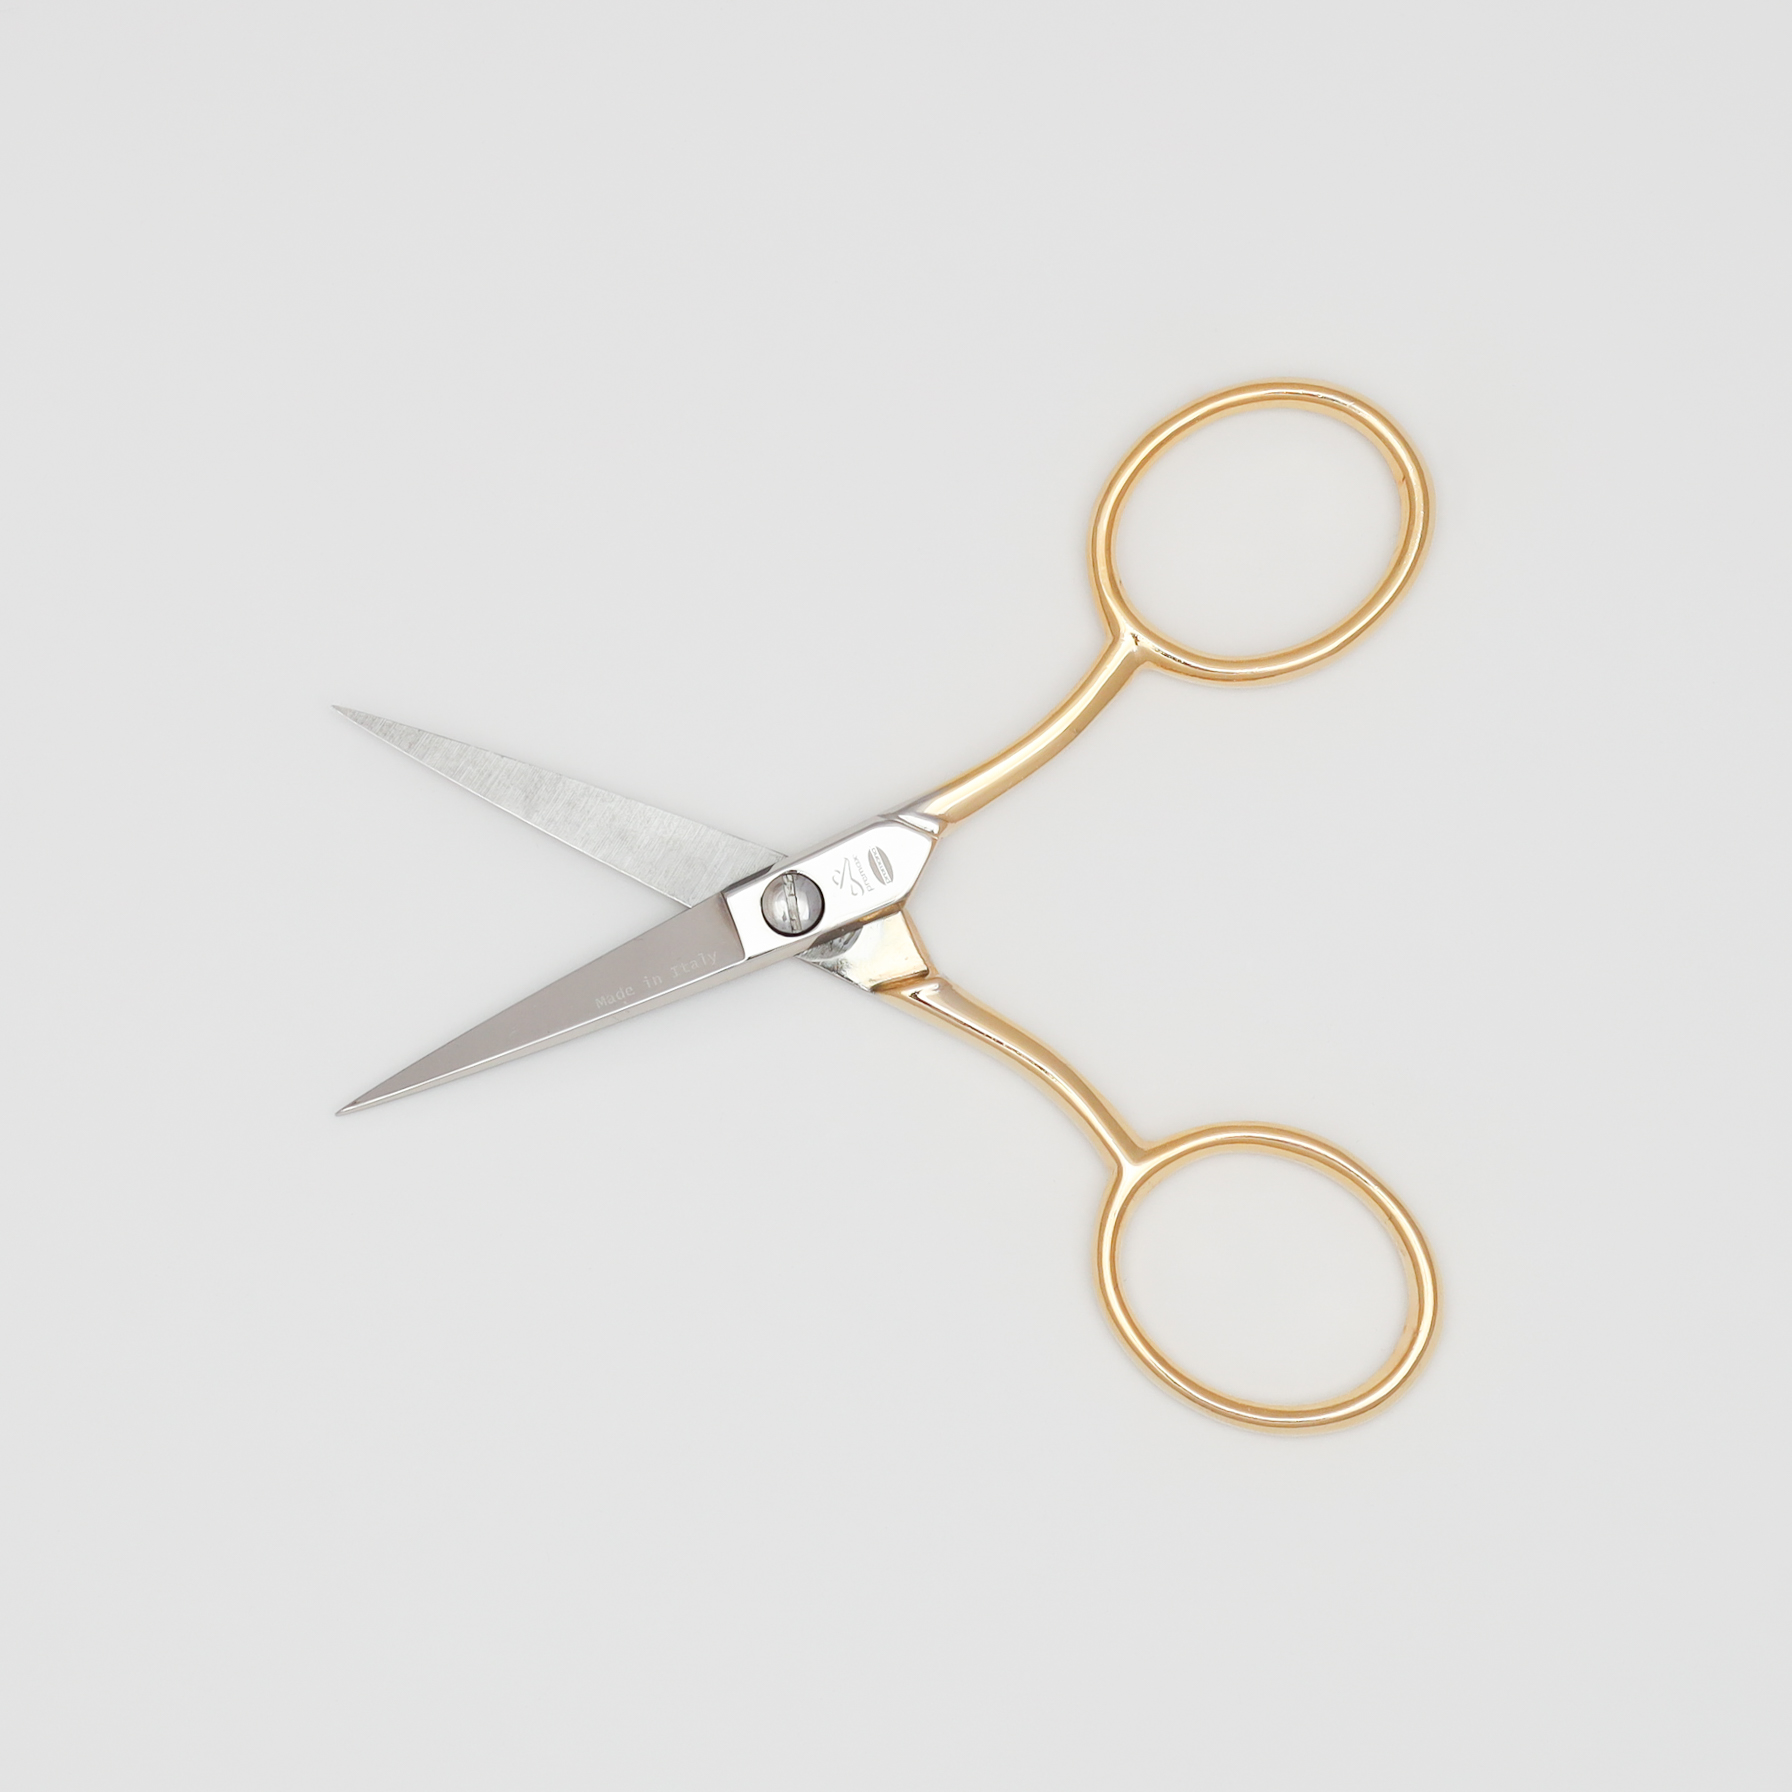 Embroidery Scissors - Large Handle